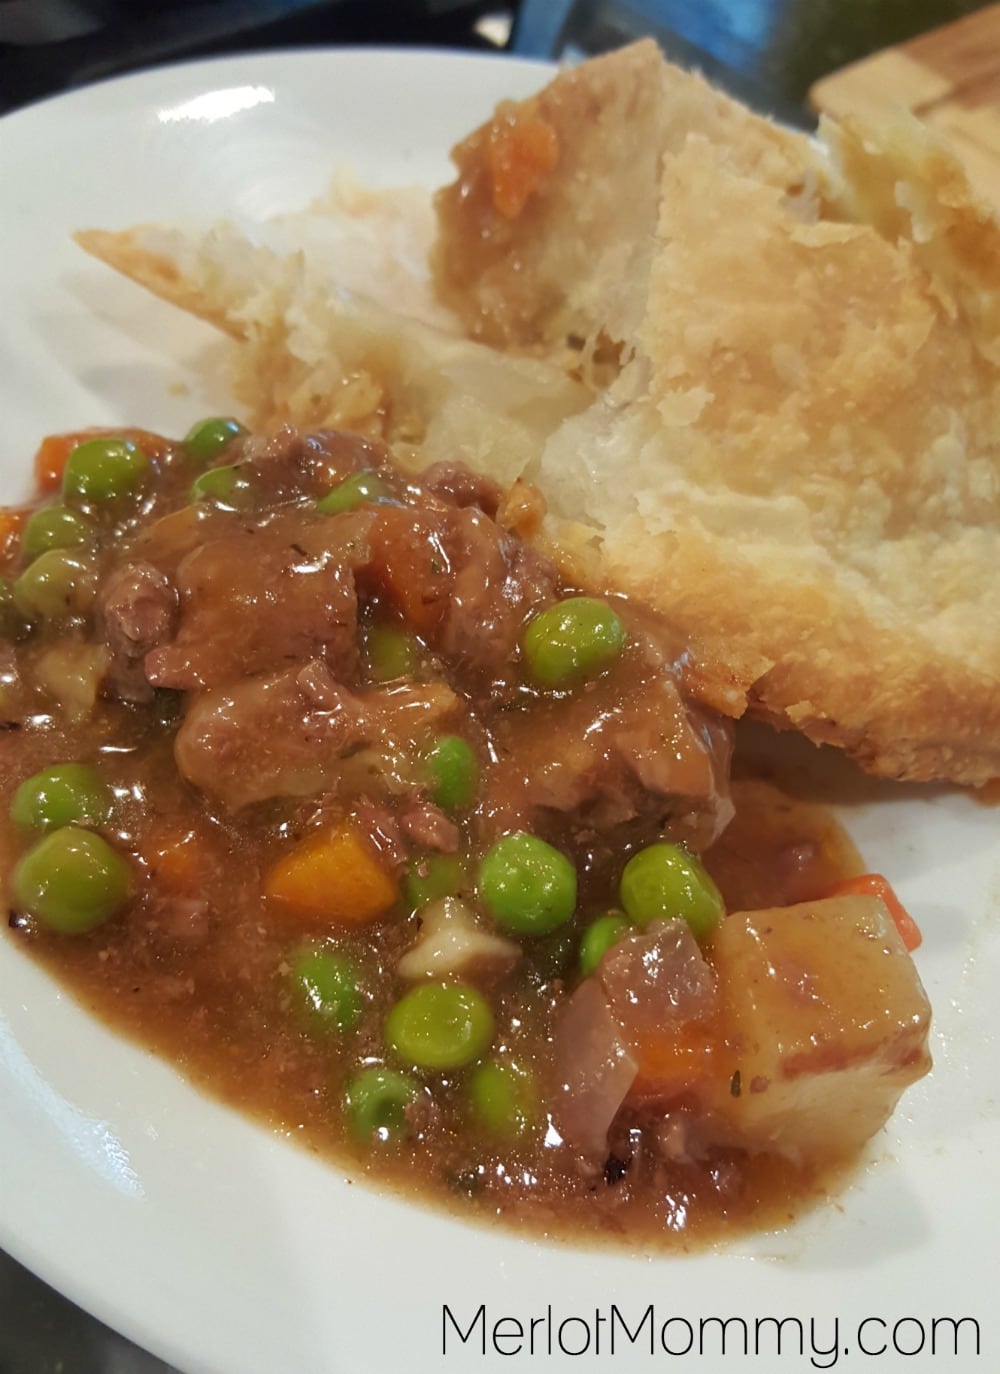 Blake's All-Natural Foods Turkey Pot Pie and Other Comfort Foods